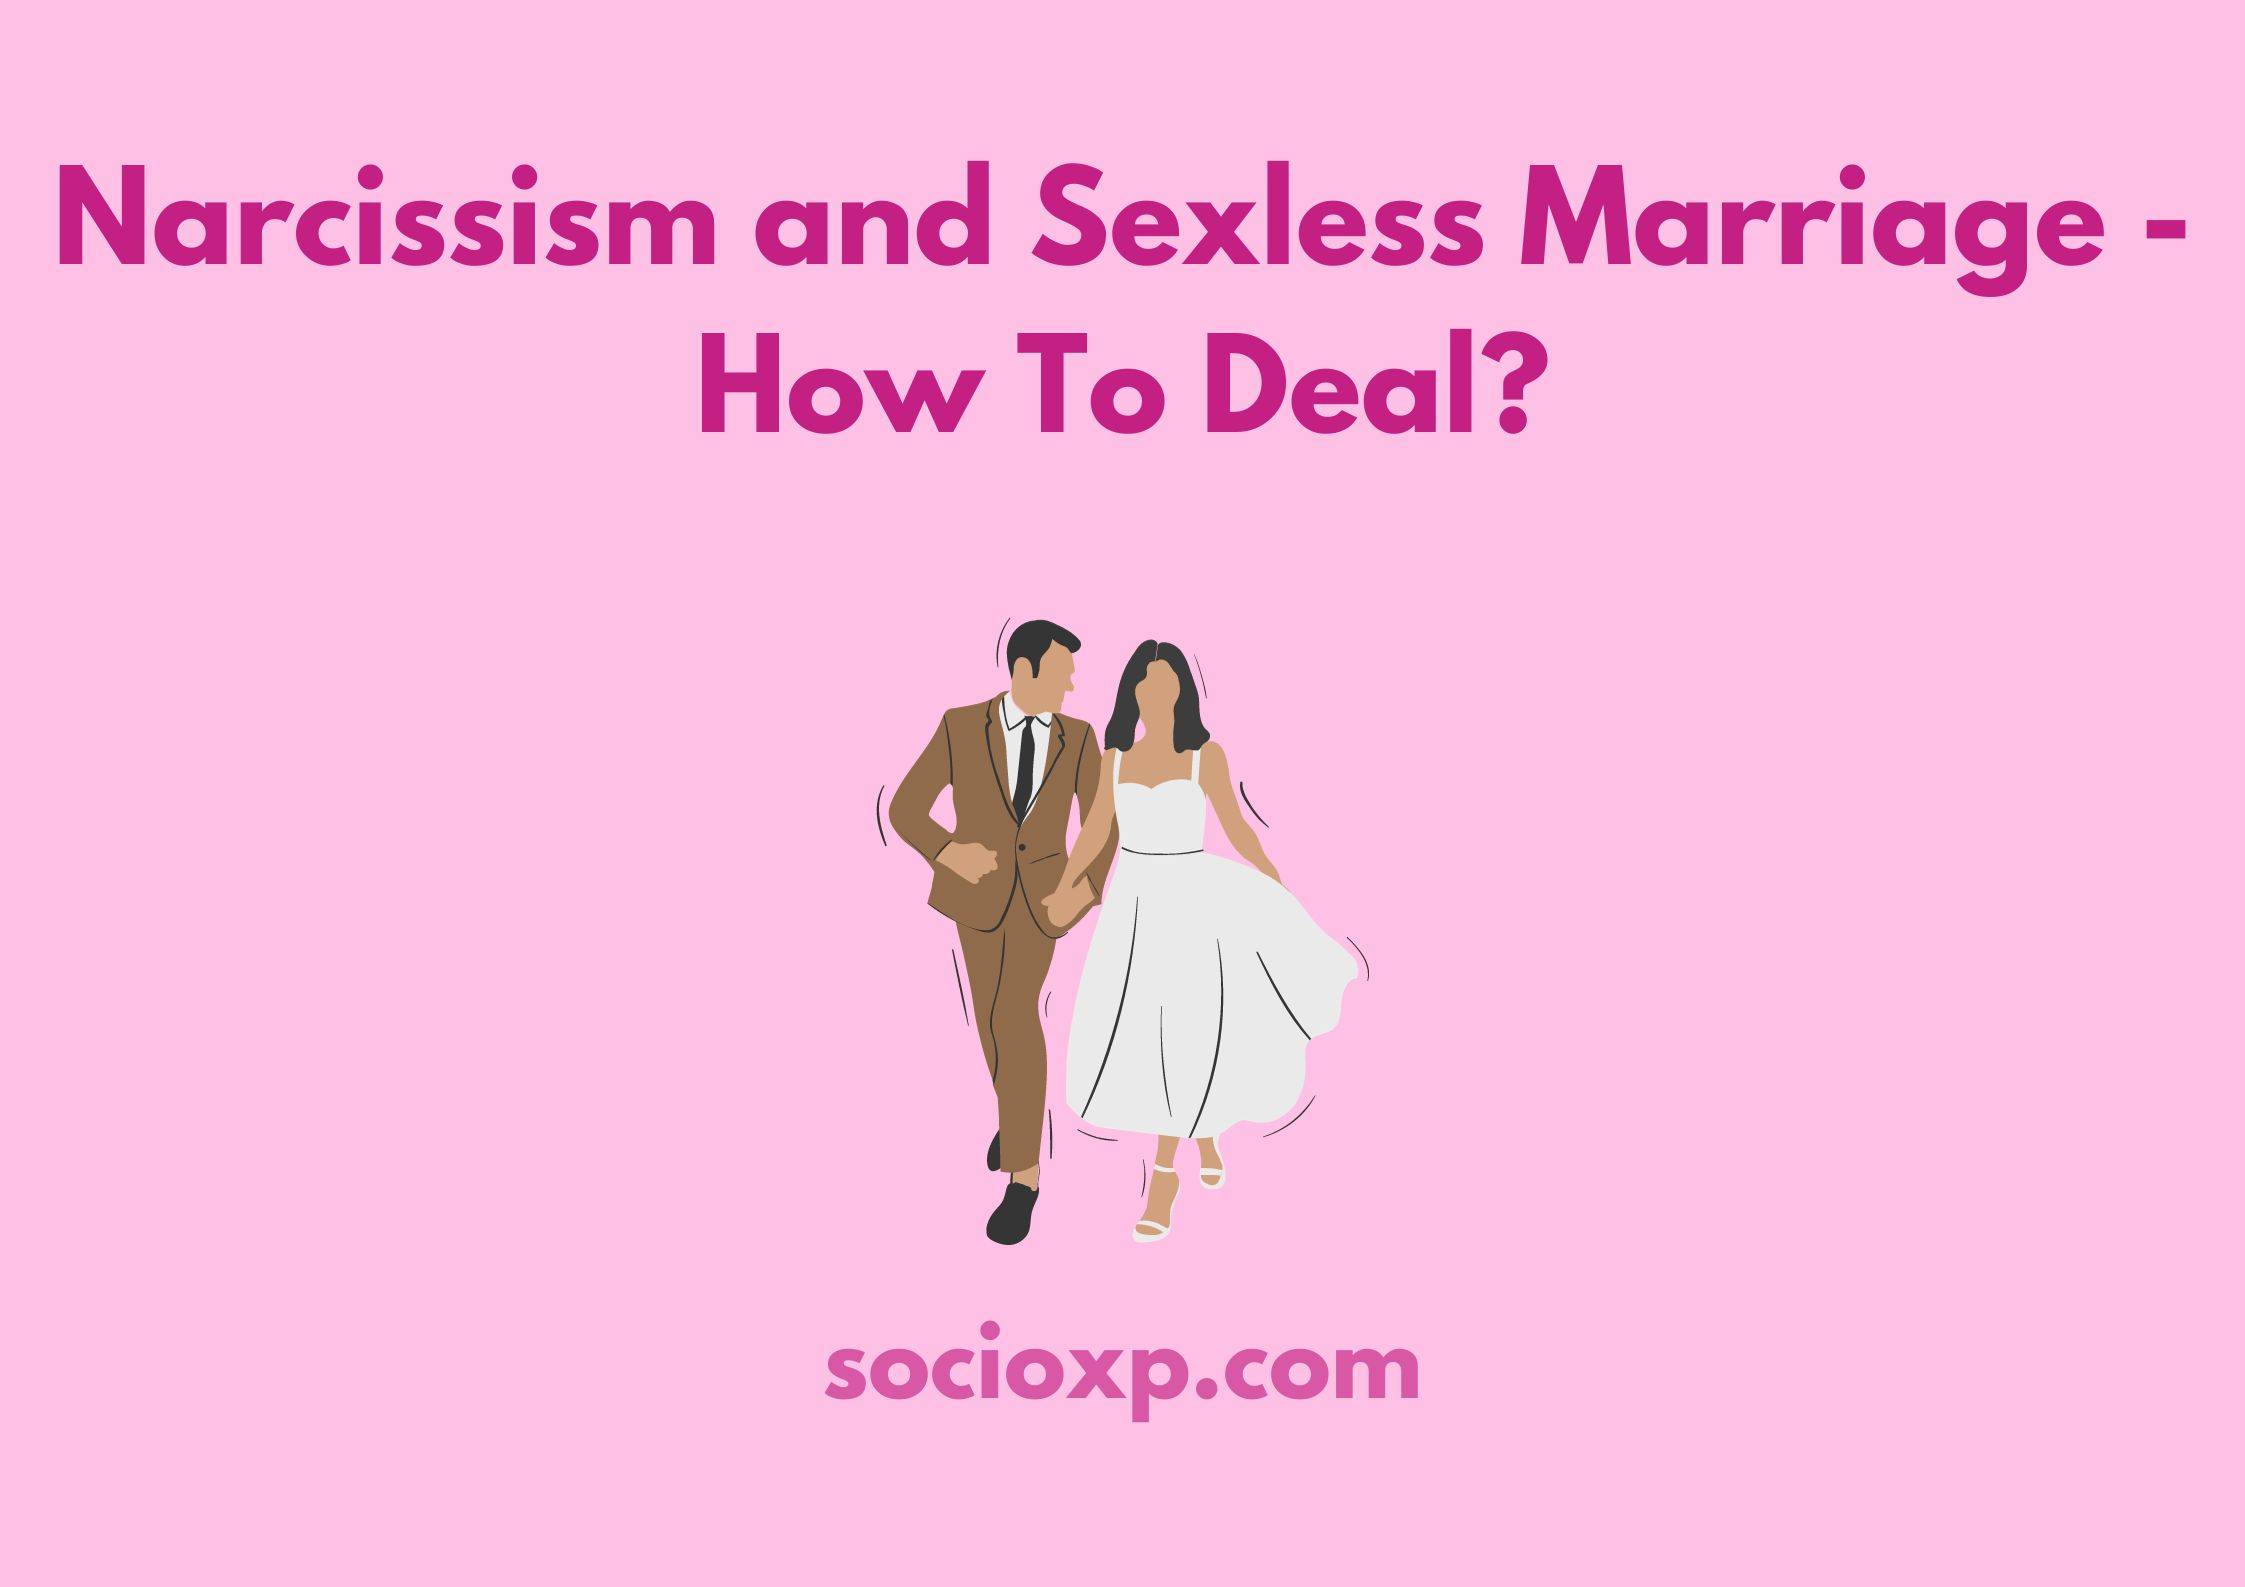 Narcissism and Sexless Marriage - How To Deal?